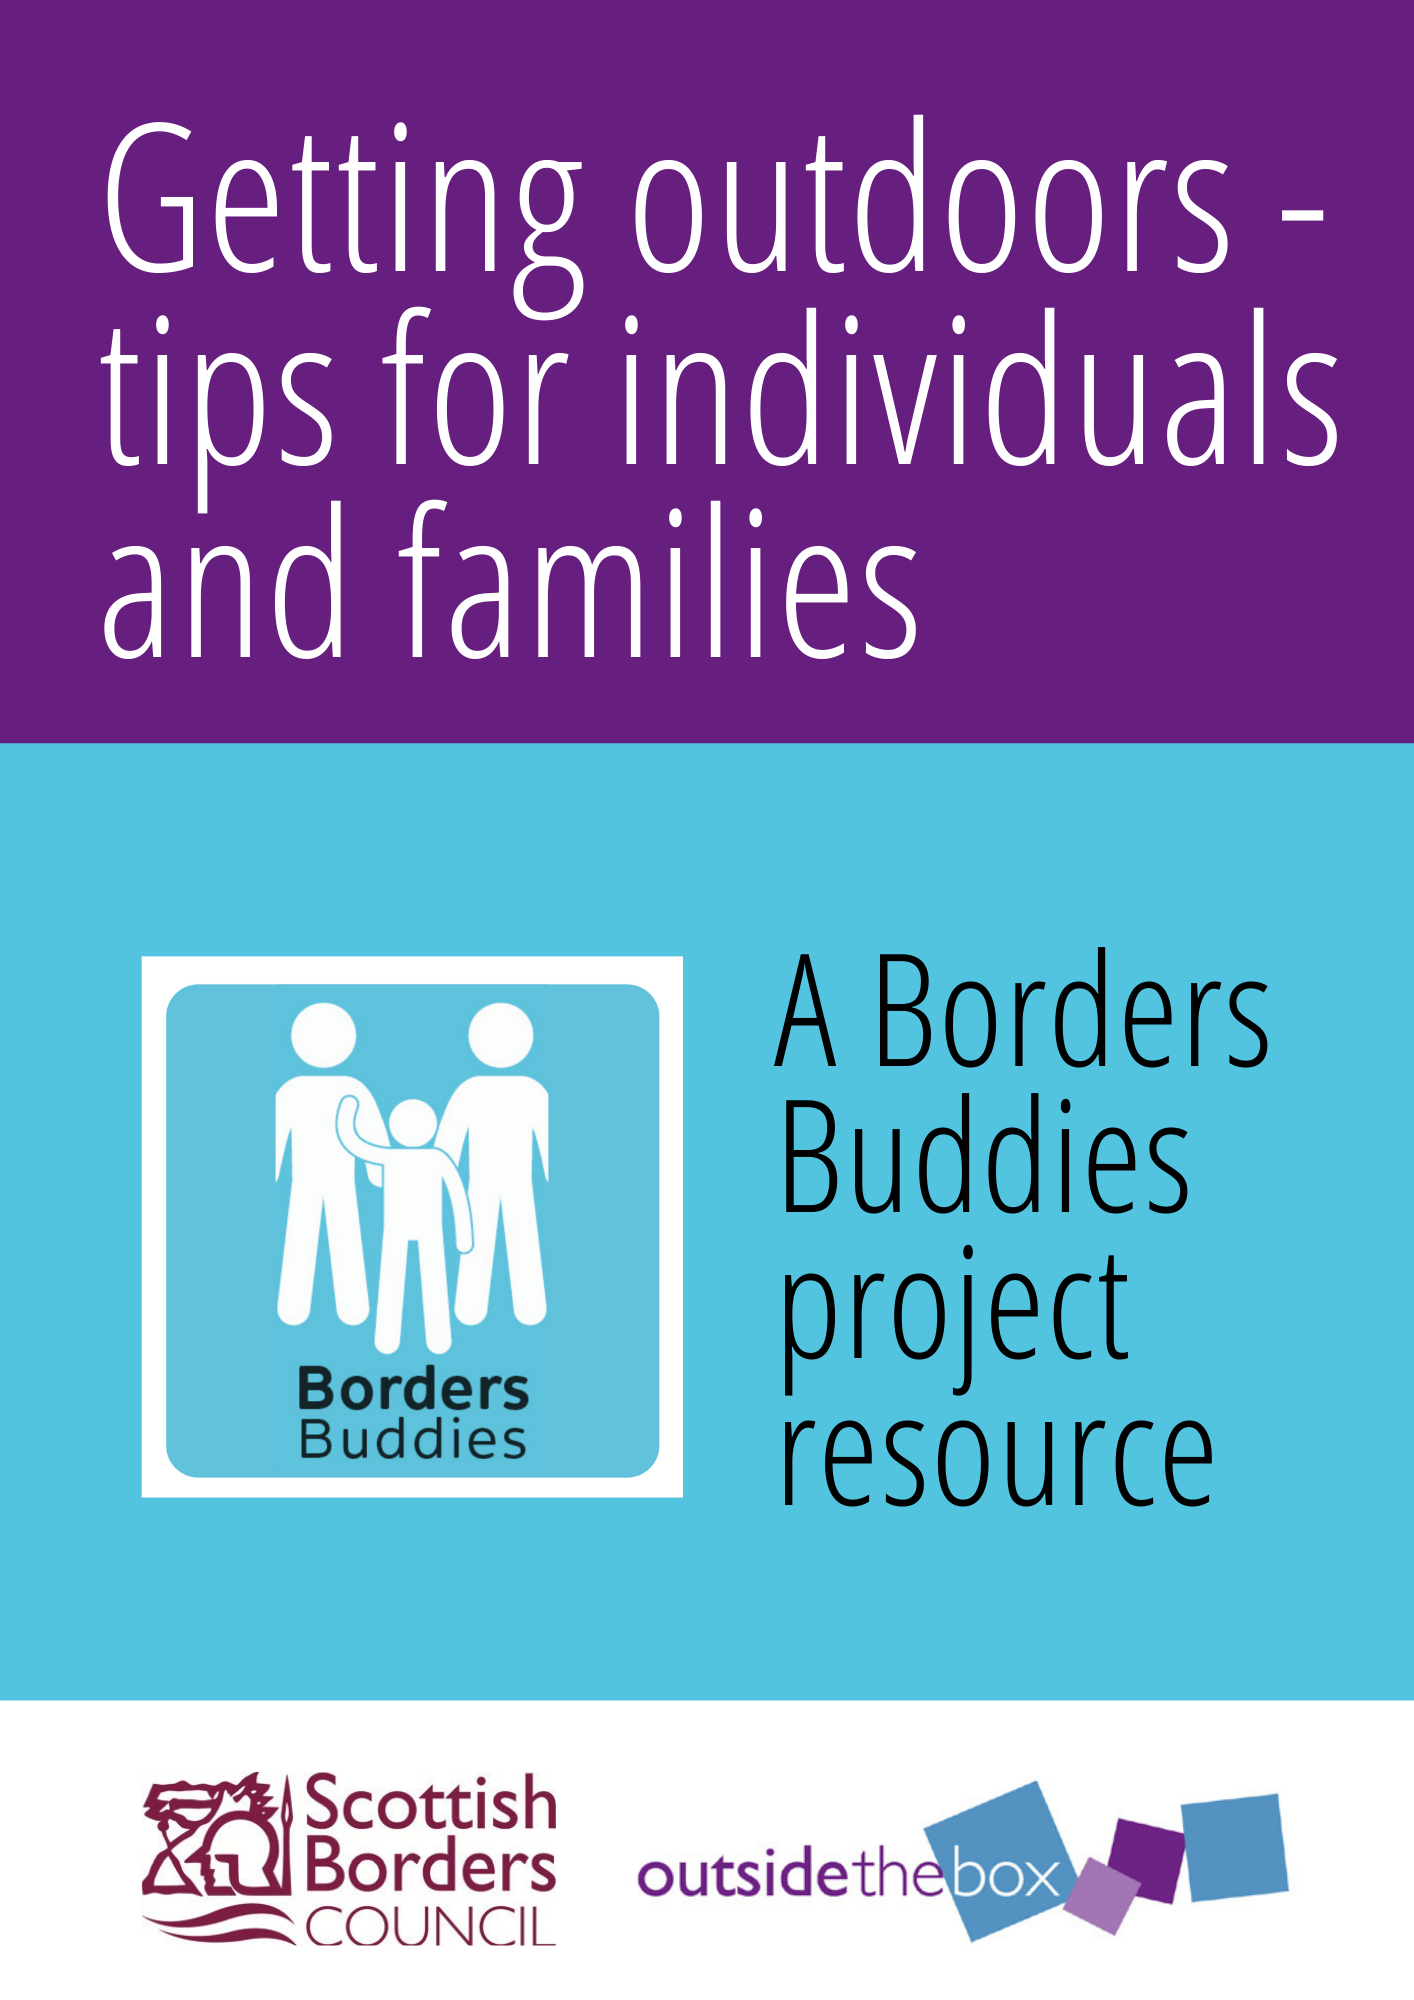 Getting outdoors - tips for individuals and families - a Borders Buddies project resource